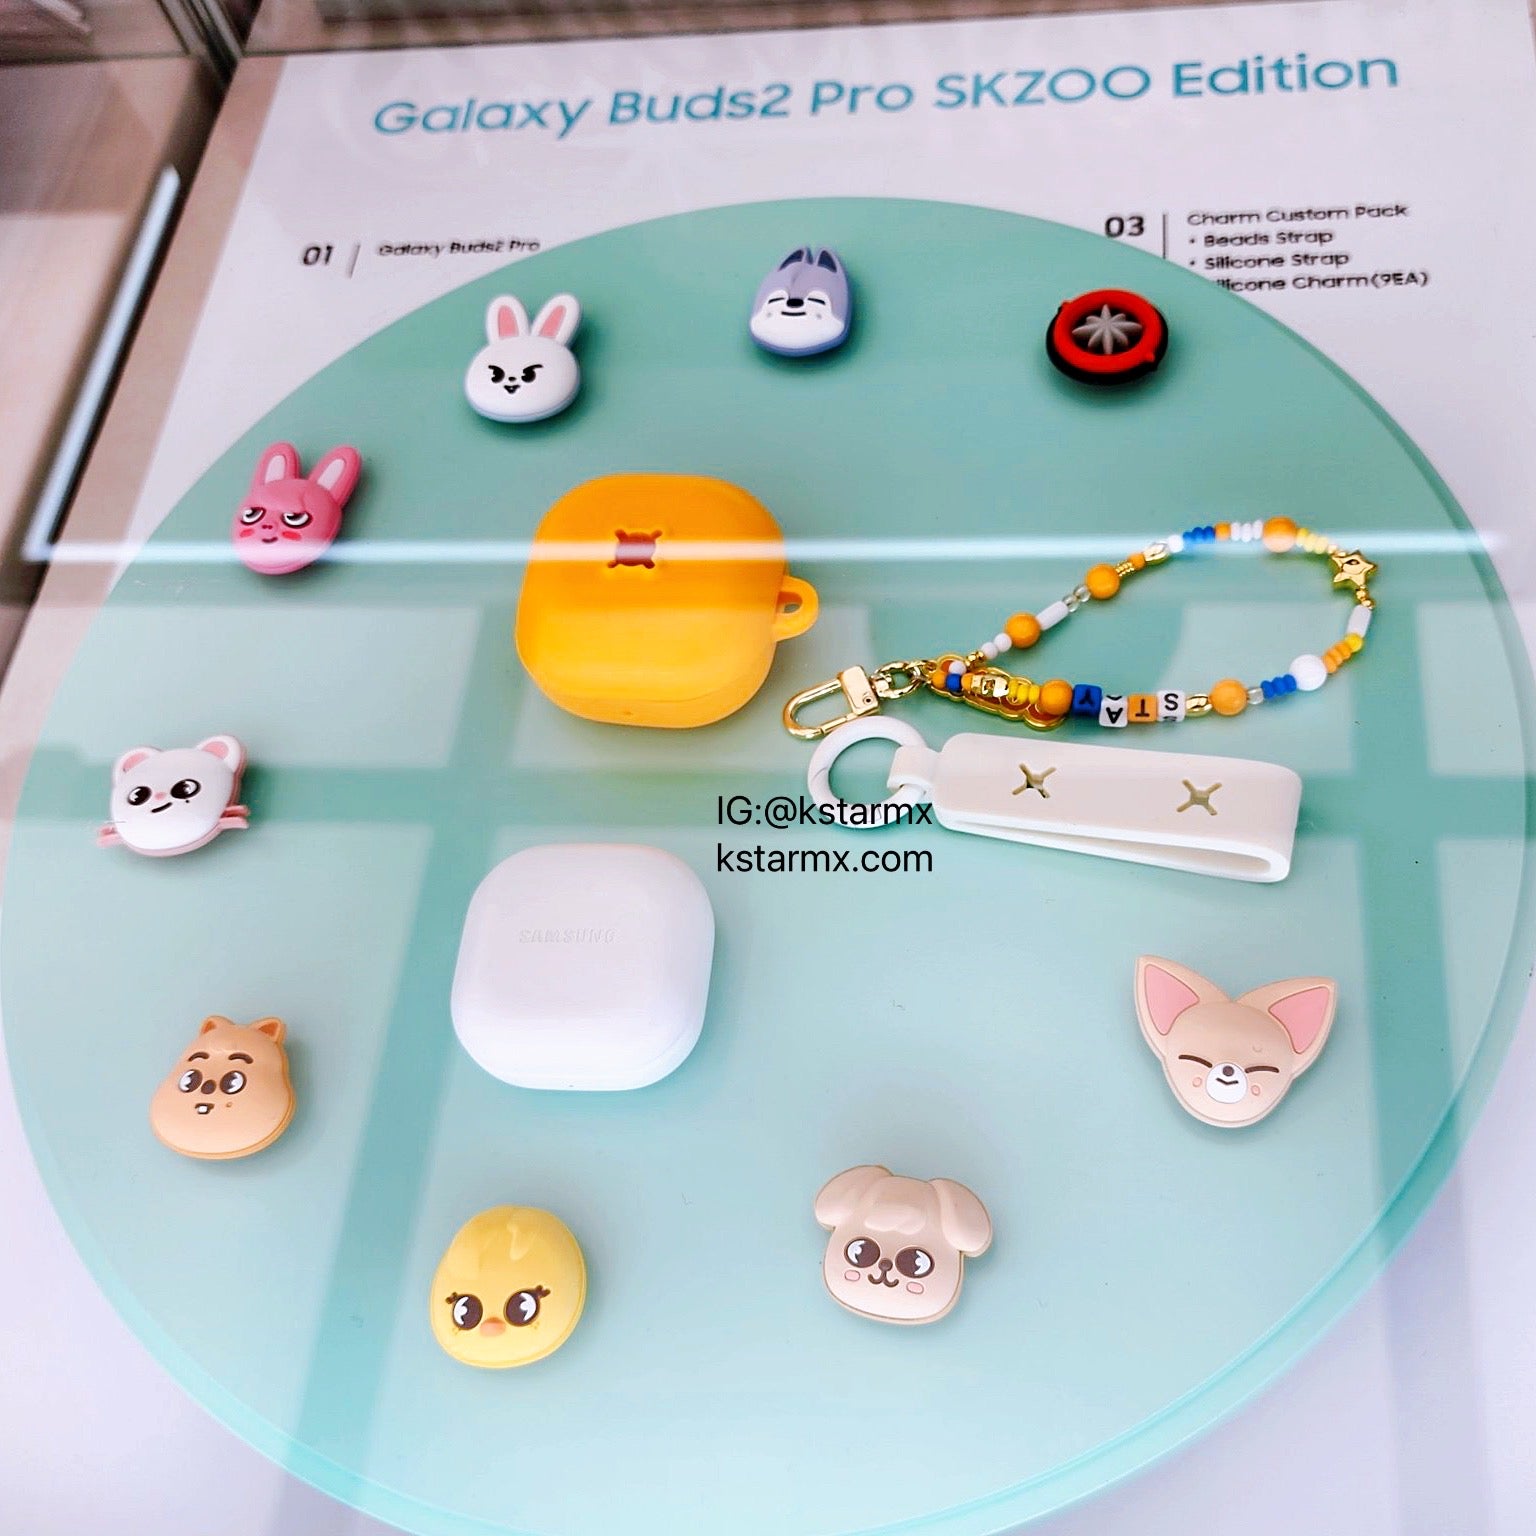 STRAY KIDS x SLBS Official Galaxy Buds2 Pro SKZOO Edition – K-STAR